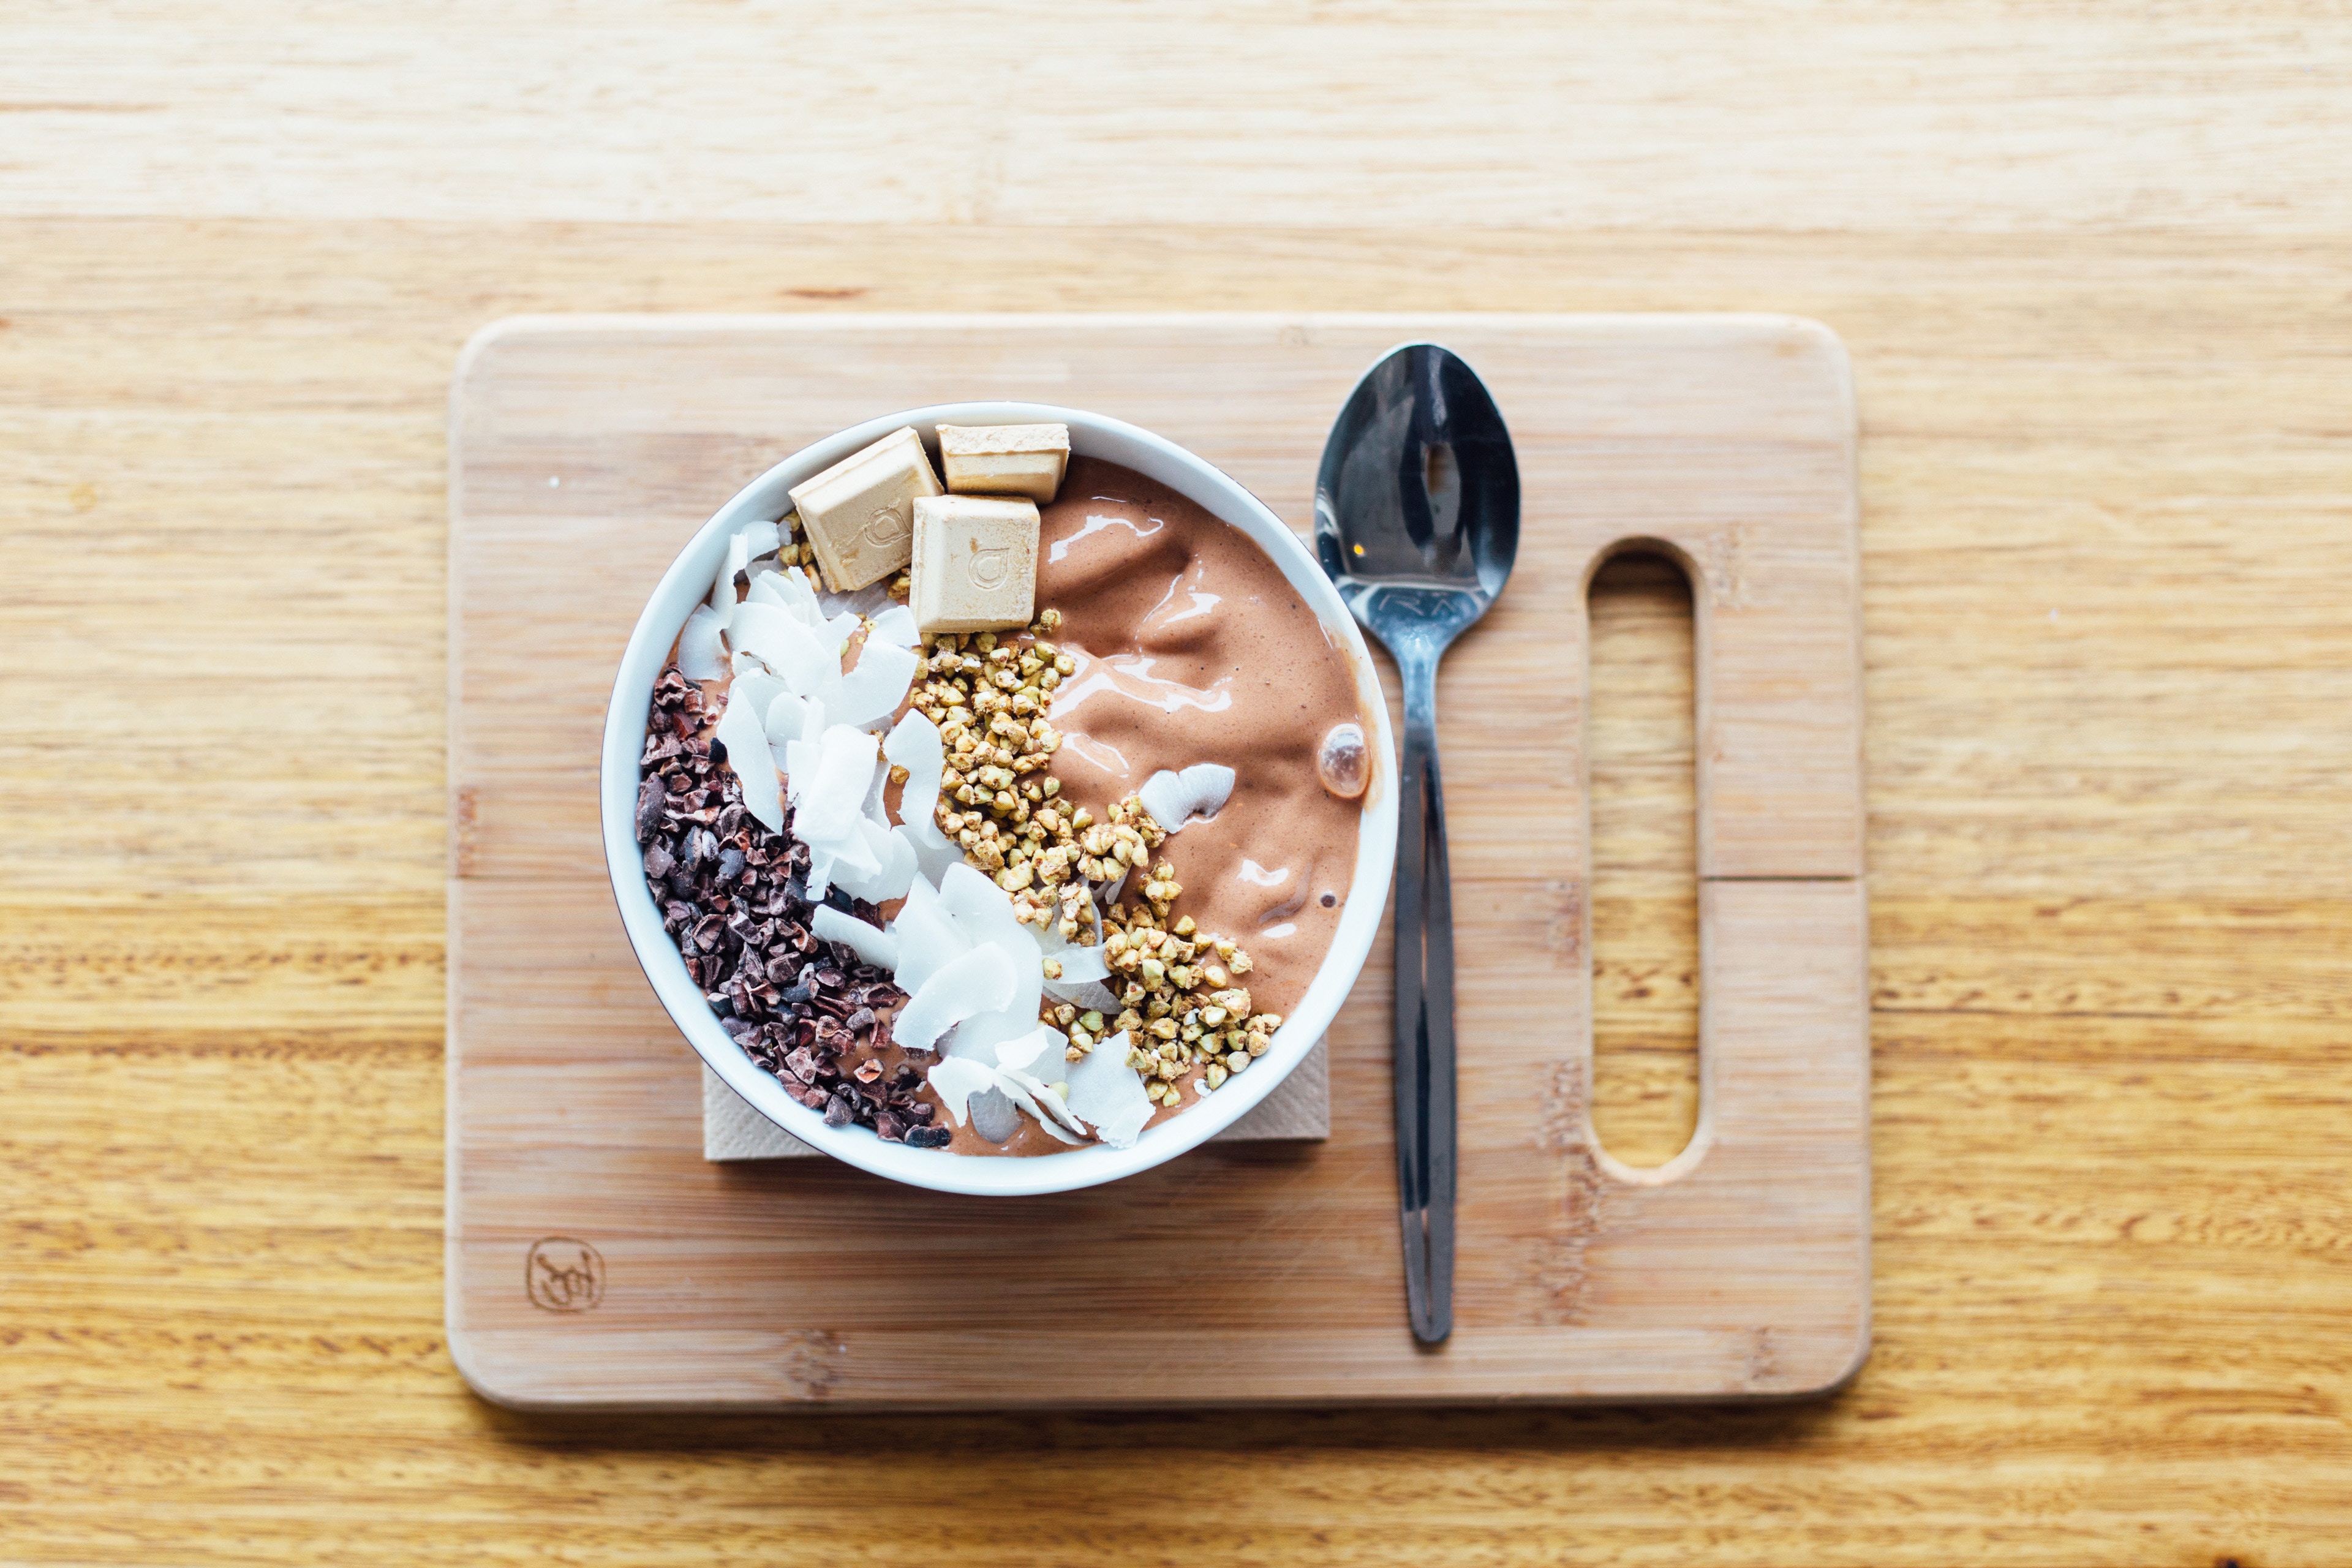 How to Make a Smoothie Bowl + 15 Nutritious Toppings